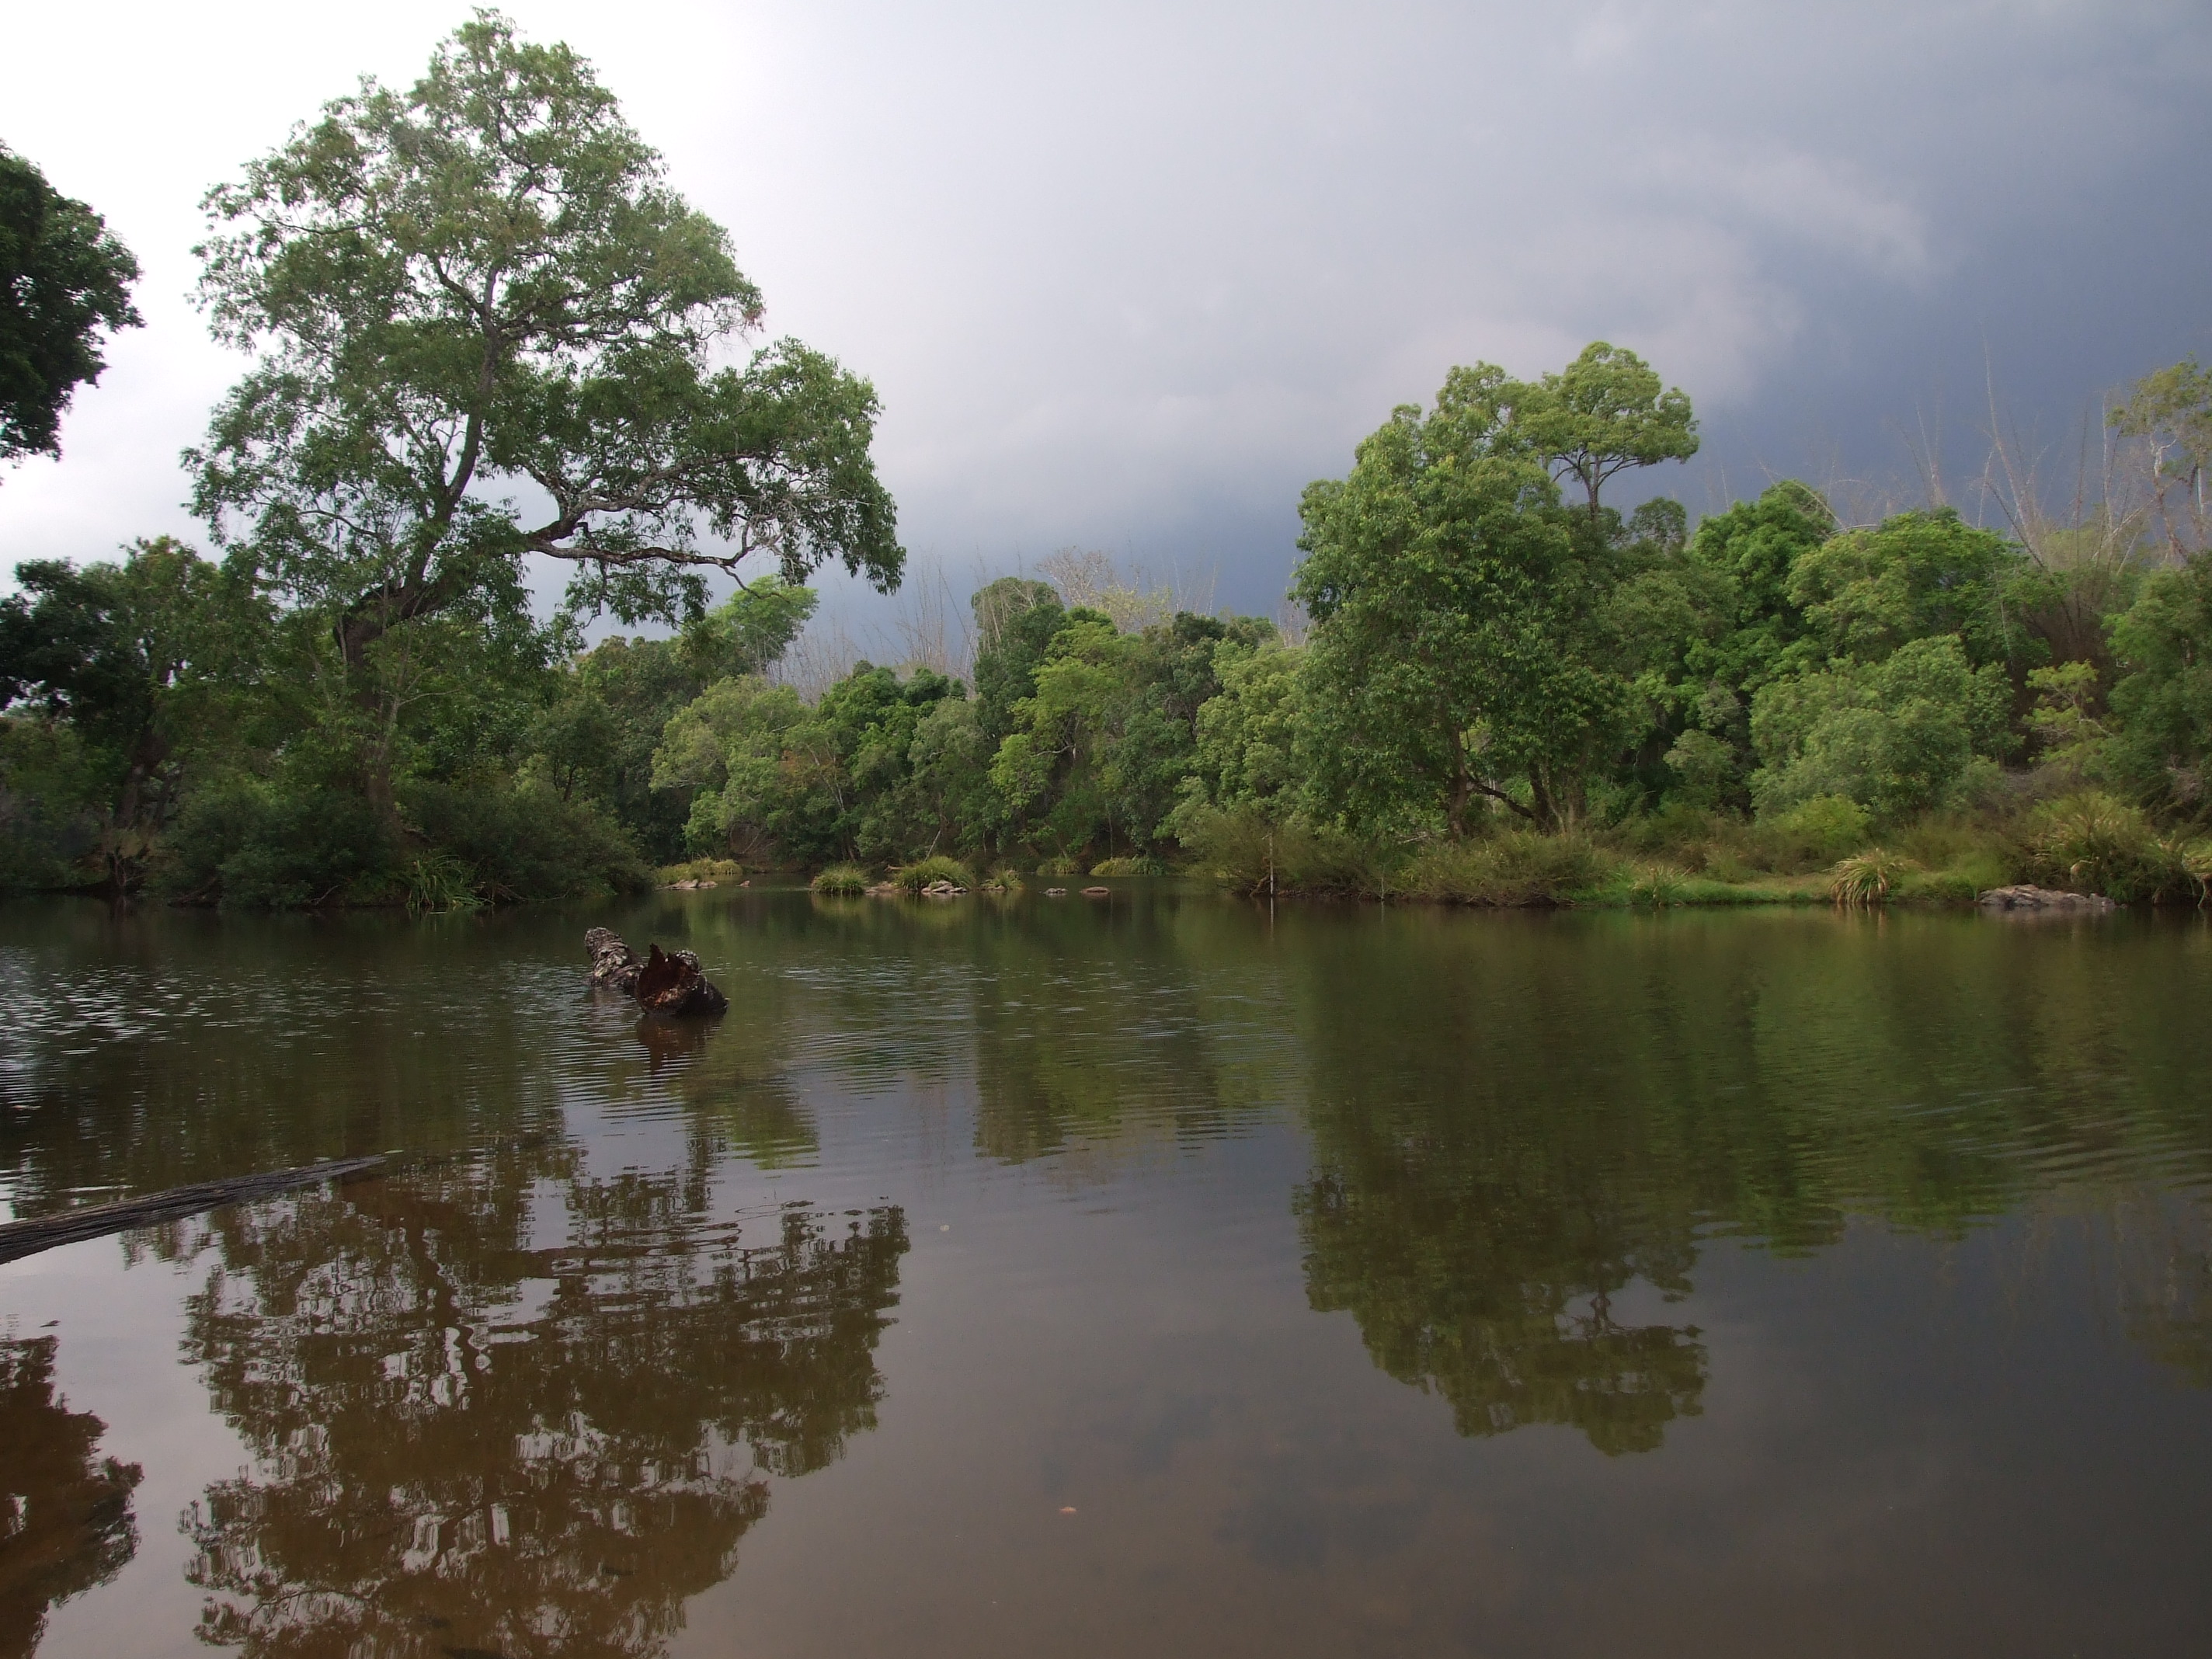 Native riverside trees protect the river just as they protect adjoining farmlands from erosion. Credit: Nisarg Prakash